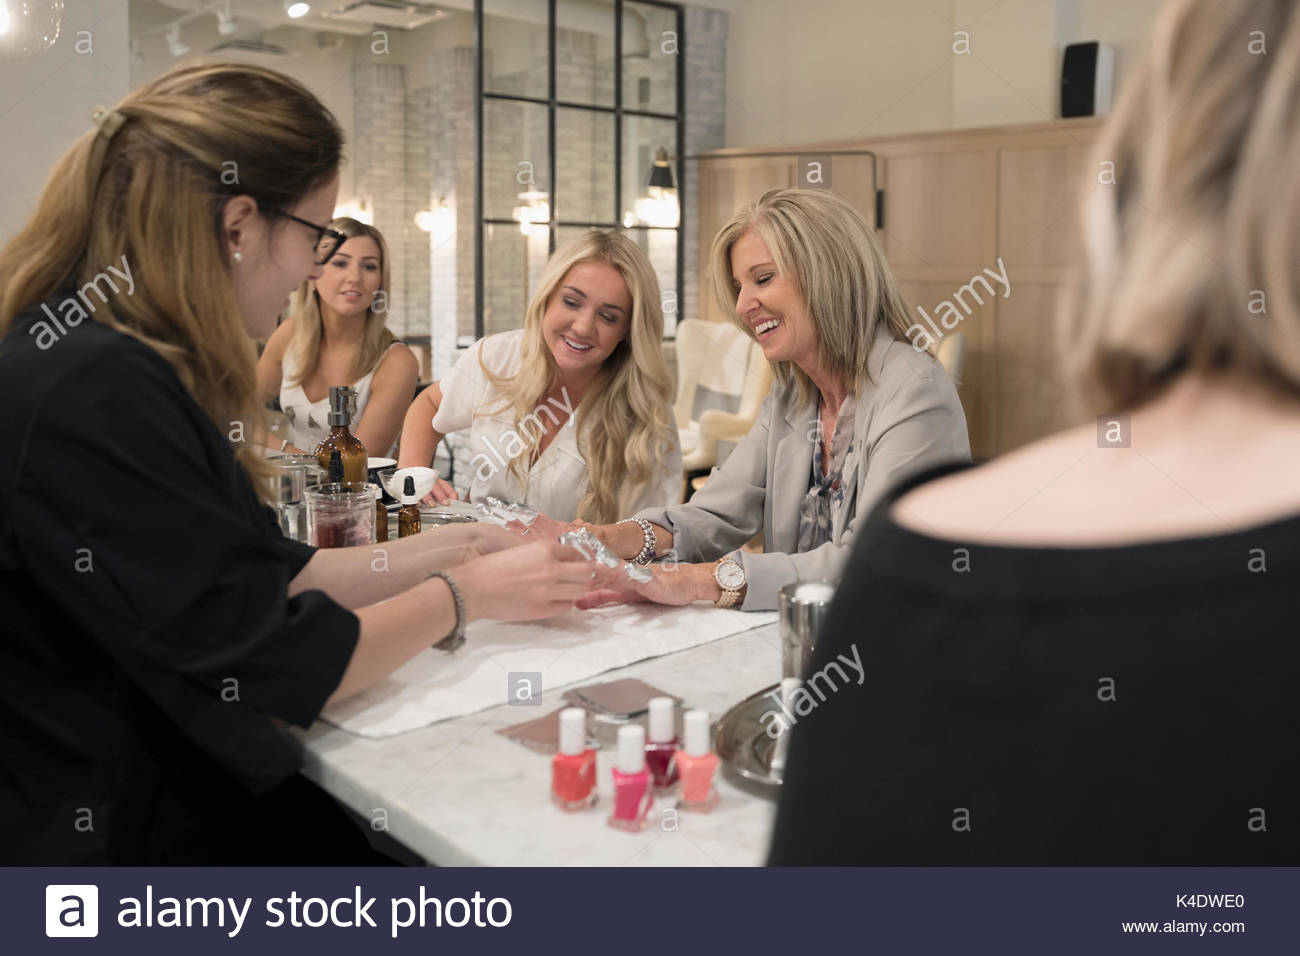 Female nail technician giving manicure to mother and adult daughters in nail salon Stock Photo